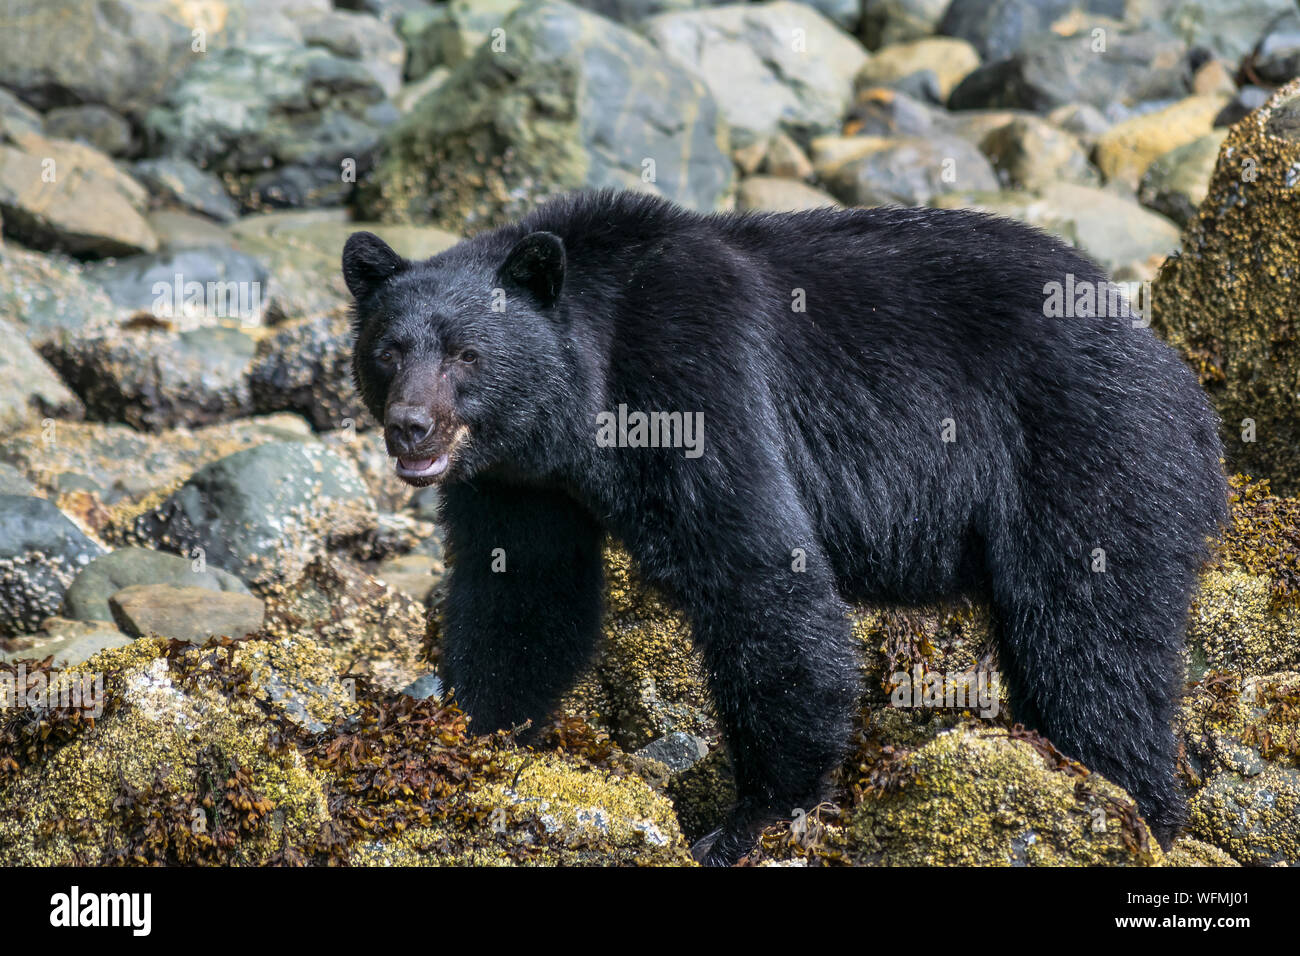 Black bear tours are a popular activity for visitors to the west coast of Vancouver Island, British Columbia, out of the towns of Tofino and Ucluelet. Stock Photo